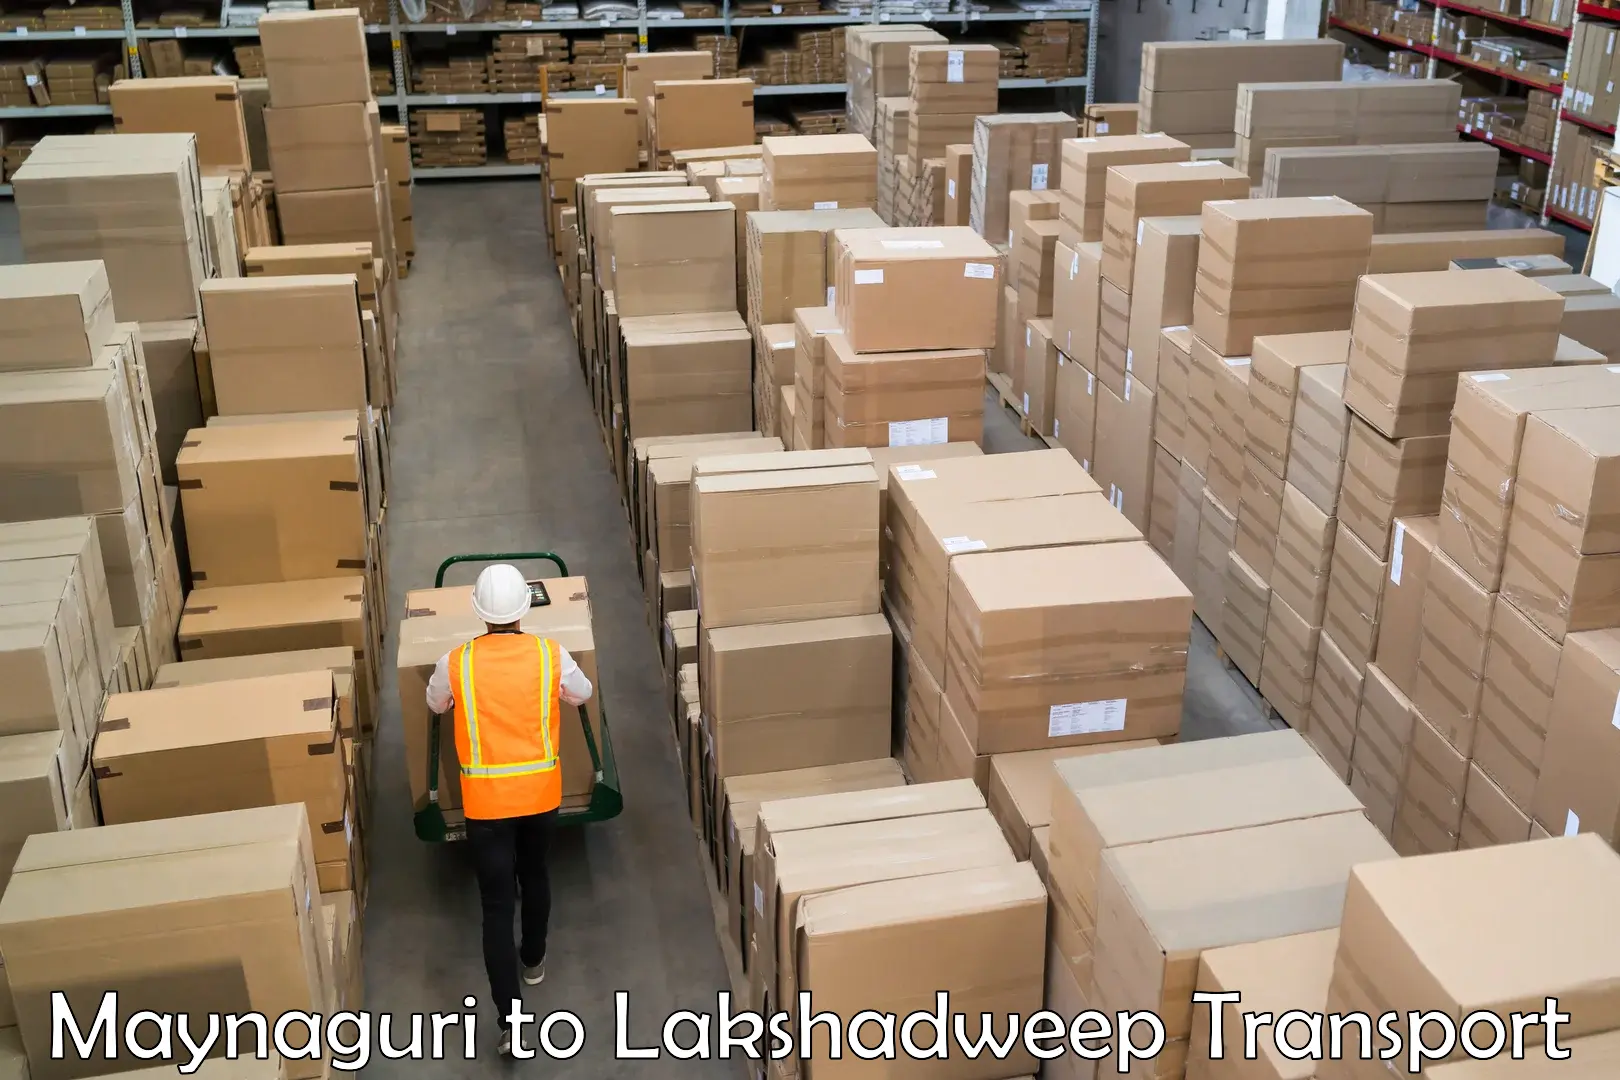 Air freight transport services in Maynaguri to Lakshadweep